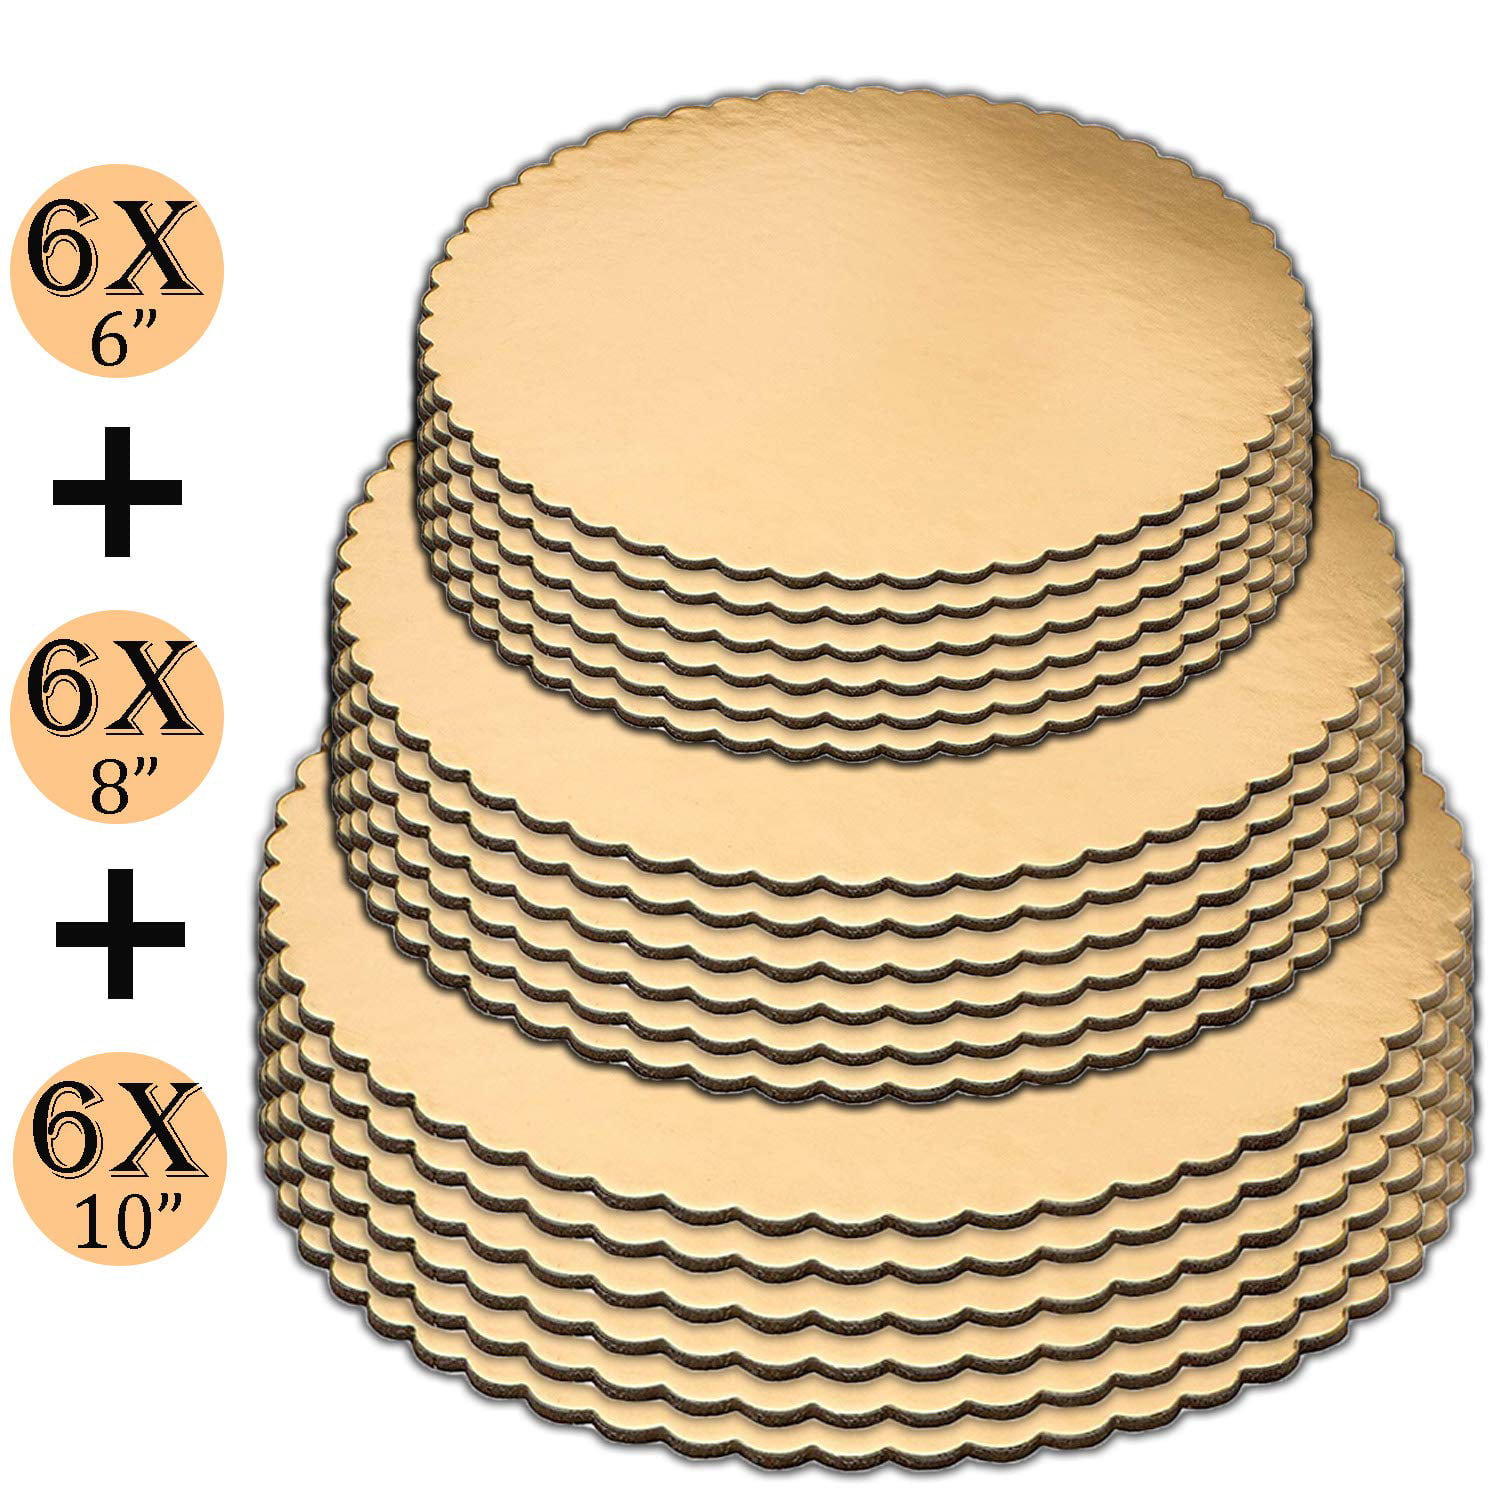 cake cardboard rounds Pizza and Cake Circle Cake Board Circles cake circles 7 inch 7 inch cake circles 7, Pack of 50